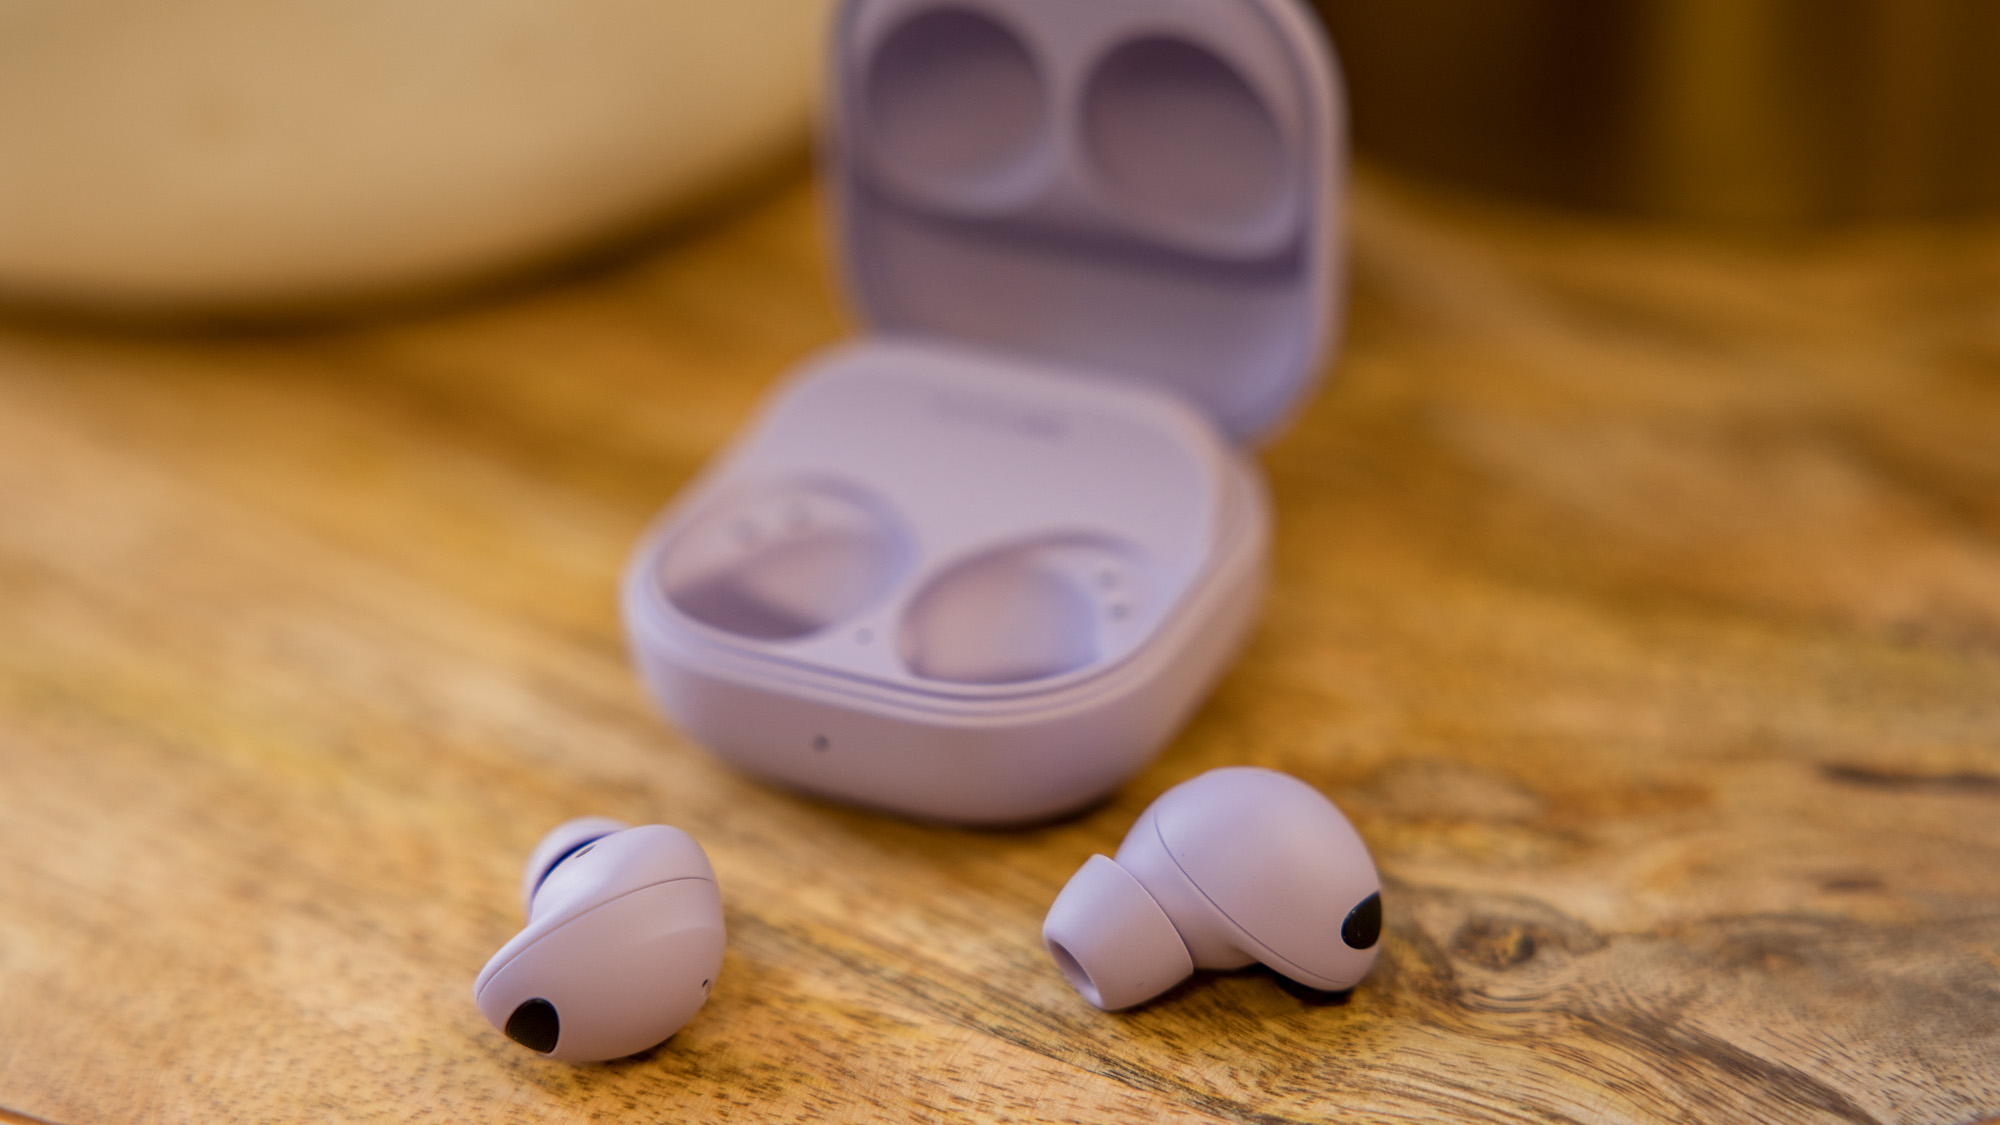 Samsung Galaxy Buds 2 Pro - Best for Samsung Users